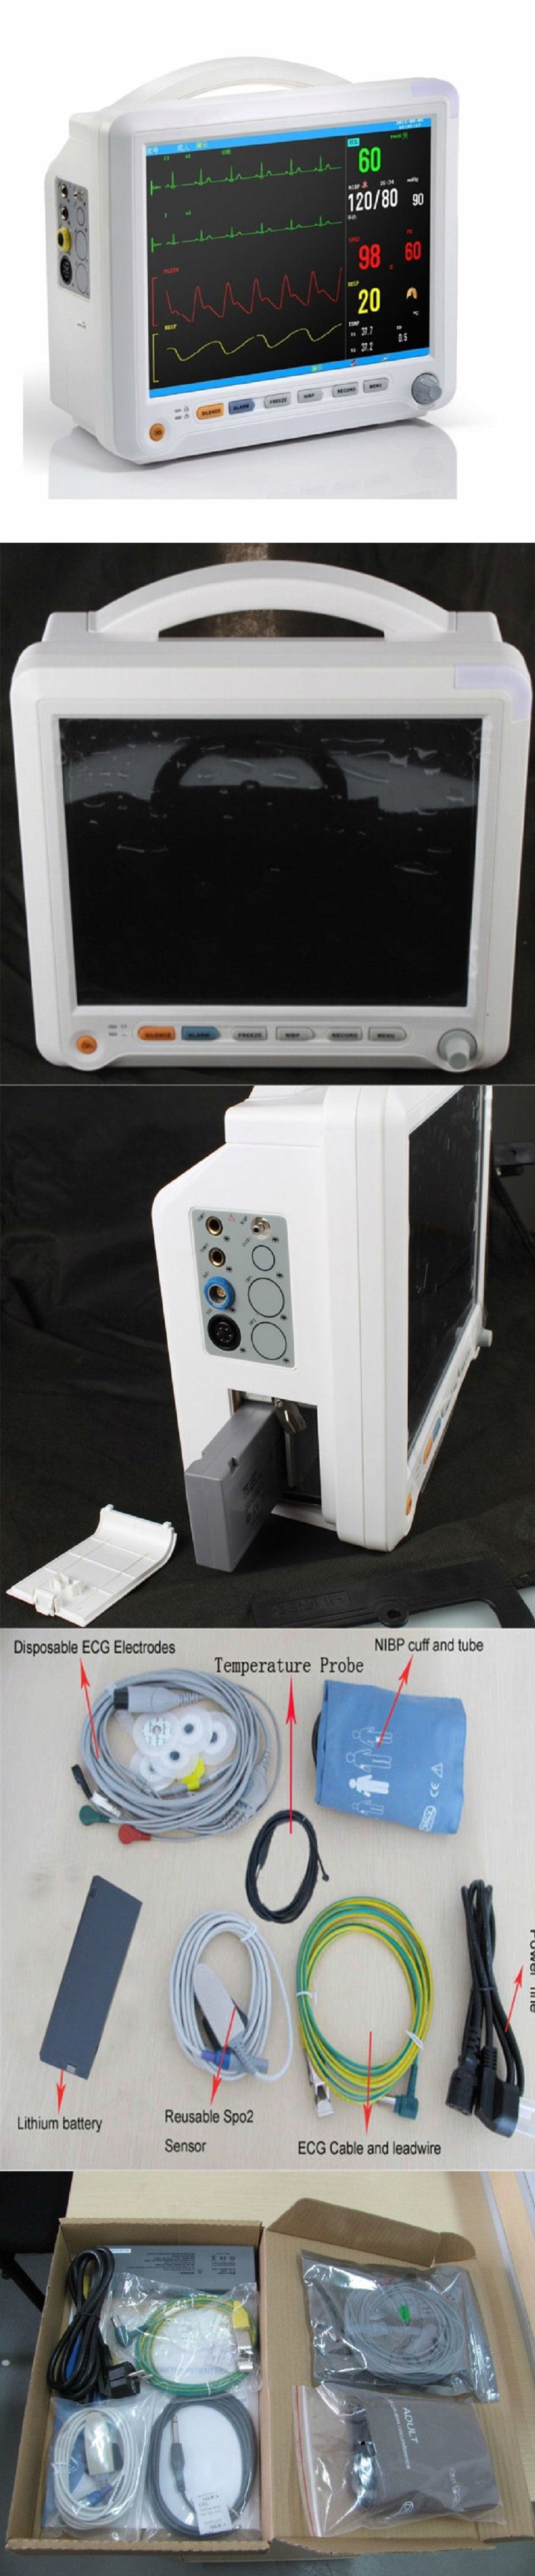 Good Quality Hm-8000b Cheap Patient Monitor Multi-Parameter Patient Monitor Price for Sale